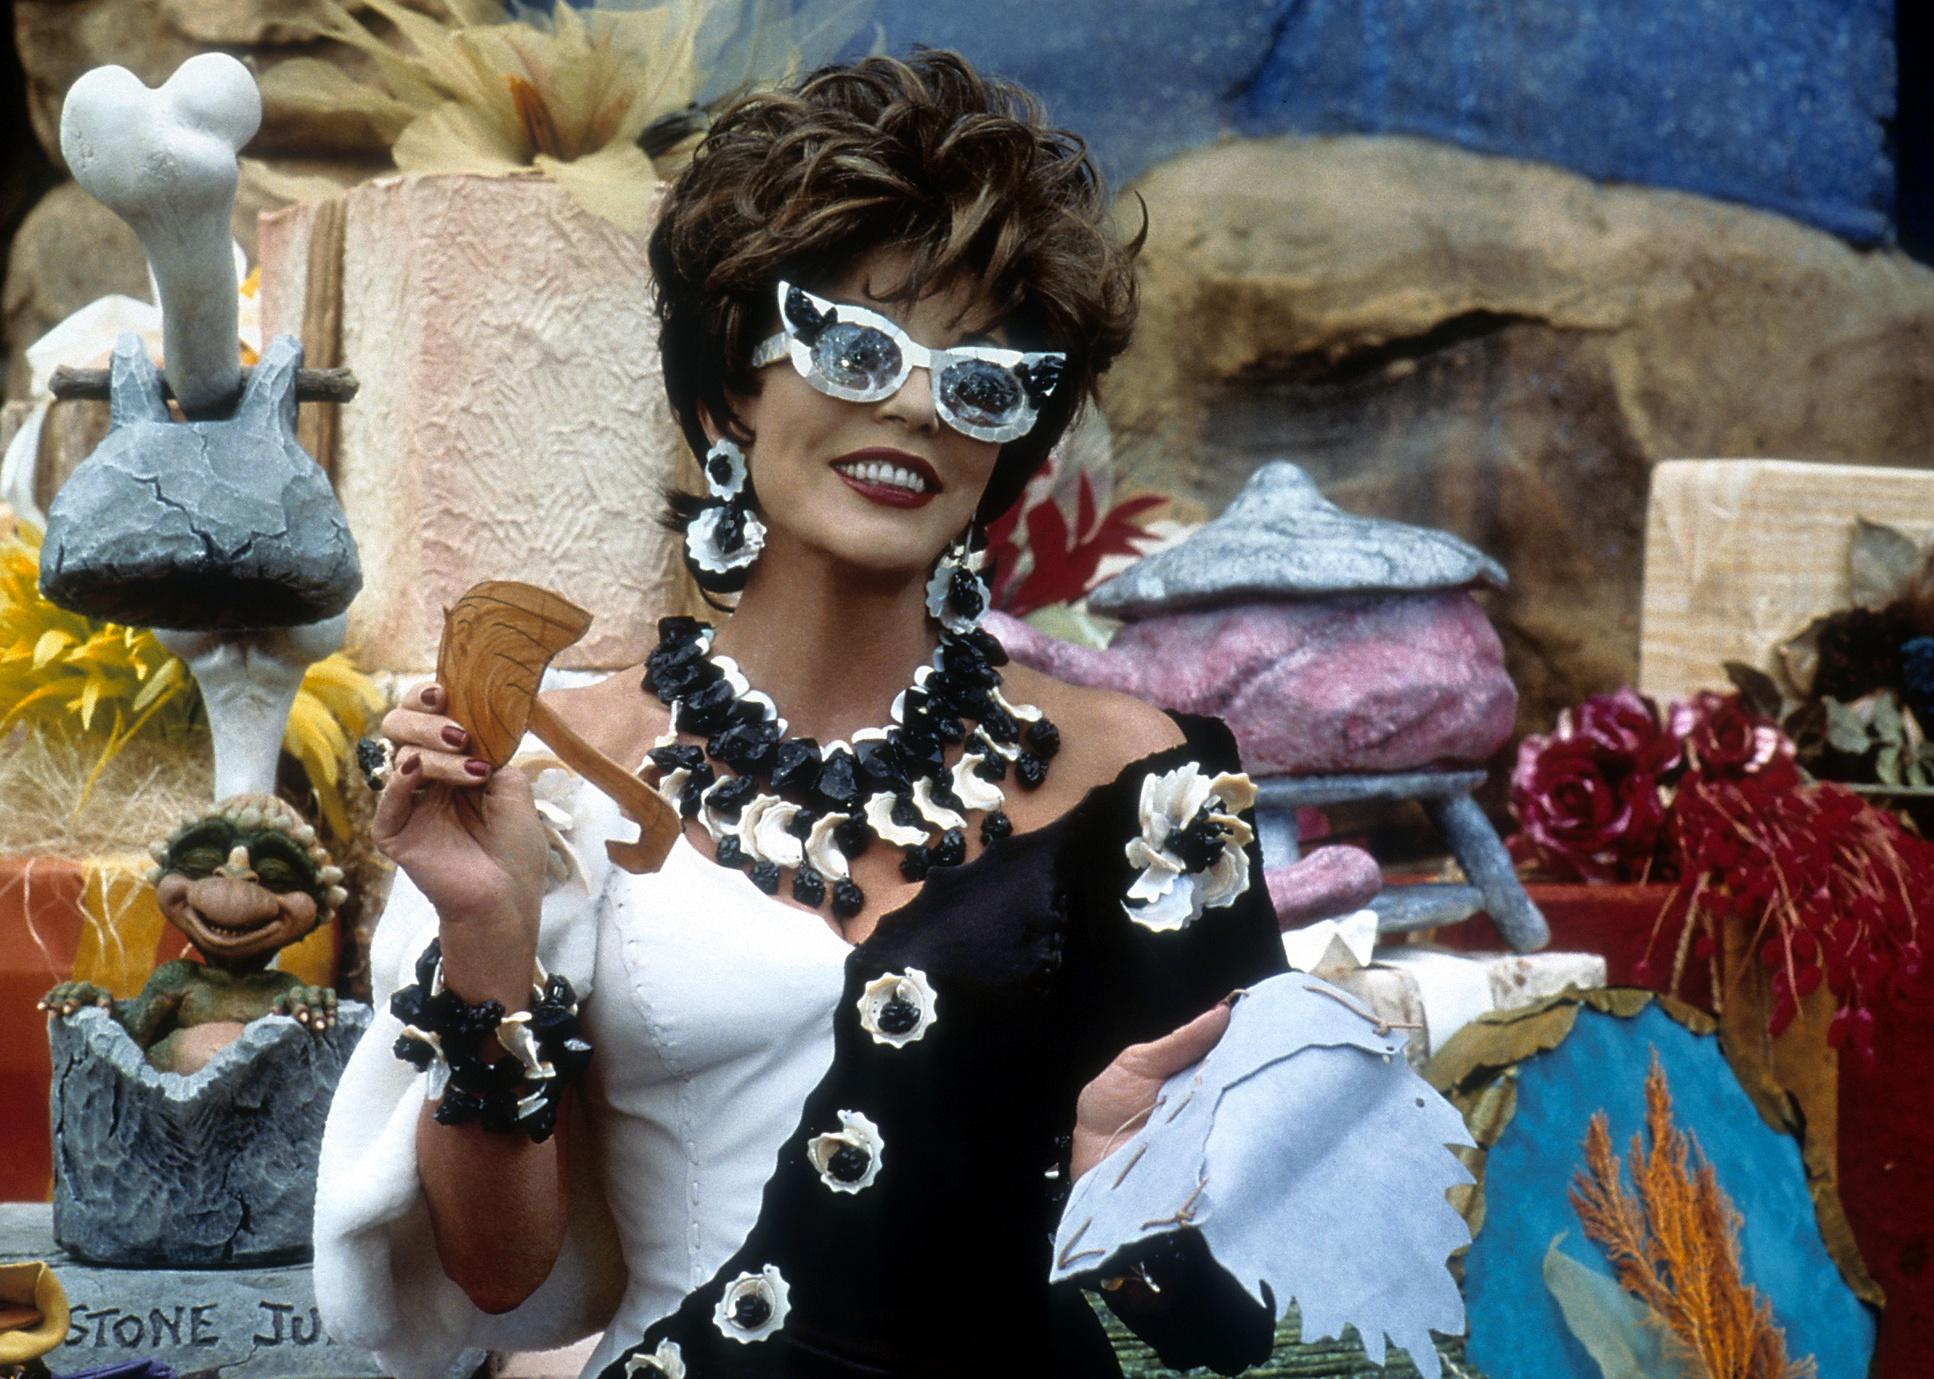 Joan Collins in a black and white dress and big white glasses smiling.